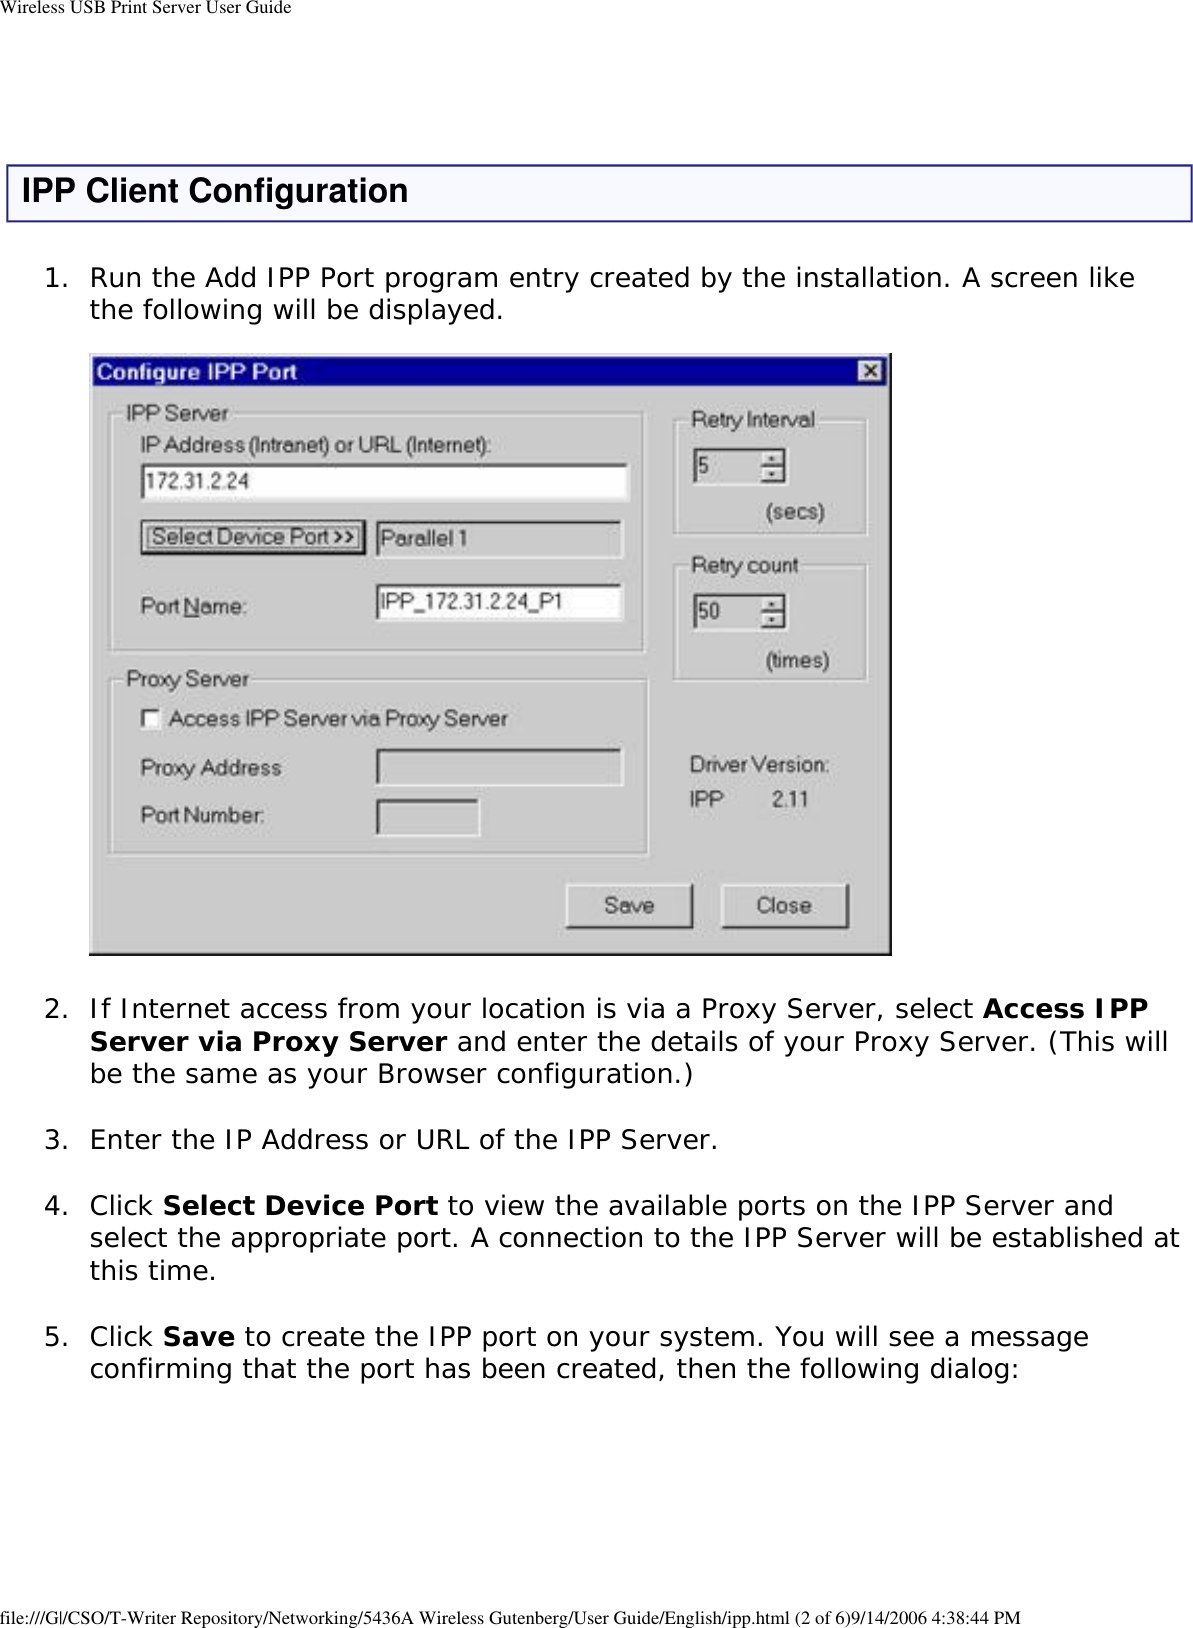 Wireless USB Print Server User Guide IPP Client Configuration1.  Run the Add IPP Port program entry created by the installation. A screen like the following will be displayed.     2.  If Internet access from your location is via a Proxy Server, select Access IPP Server via Proxy Server and enter the details of your Proxy Server. (This will be the same as your Browser configuration.) 3.  Enter the IP Address or URL of the IPP Server. 4.  Click Select Device Port to view the available ports on the IPP Server and select the appropriate port. A connection to the IPP Server will be established at this time. 5.  Click Save to create the IPP port on your system. You will see a message confirming that the port has been created, then the following dialog:   file:///G|/CSO/T-Writer Repository/Networking/5436A Wireless Gutenberg/User Guide/English/ipp.html (2 of 6)9/14/2006 4:38:44 PM